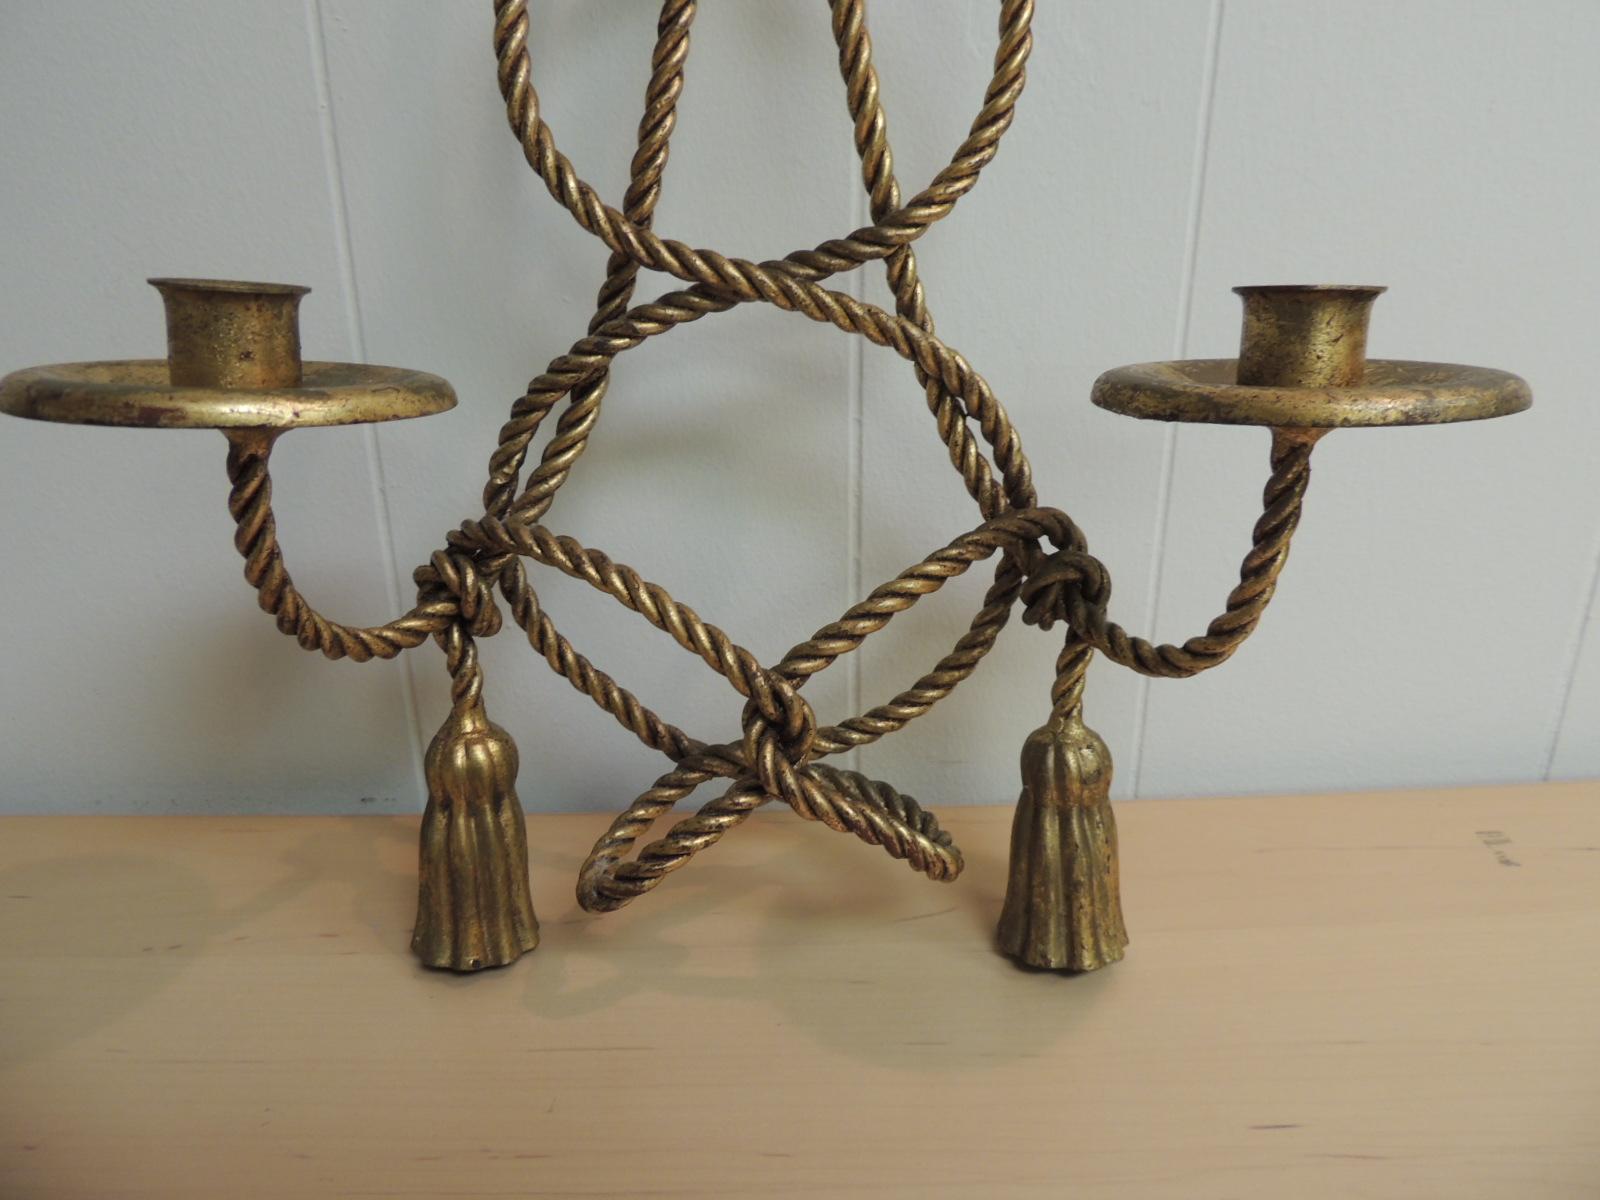 This item is part of our 7Th Anniversary SALE:
Vintage Hollywood Regency gold candle sconce.
Wall sconces with gold leaf finish, twisted rope and tassel design.  Italy, 1940s.
Measures: 13